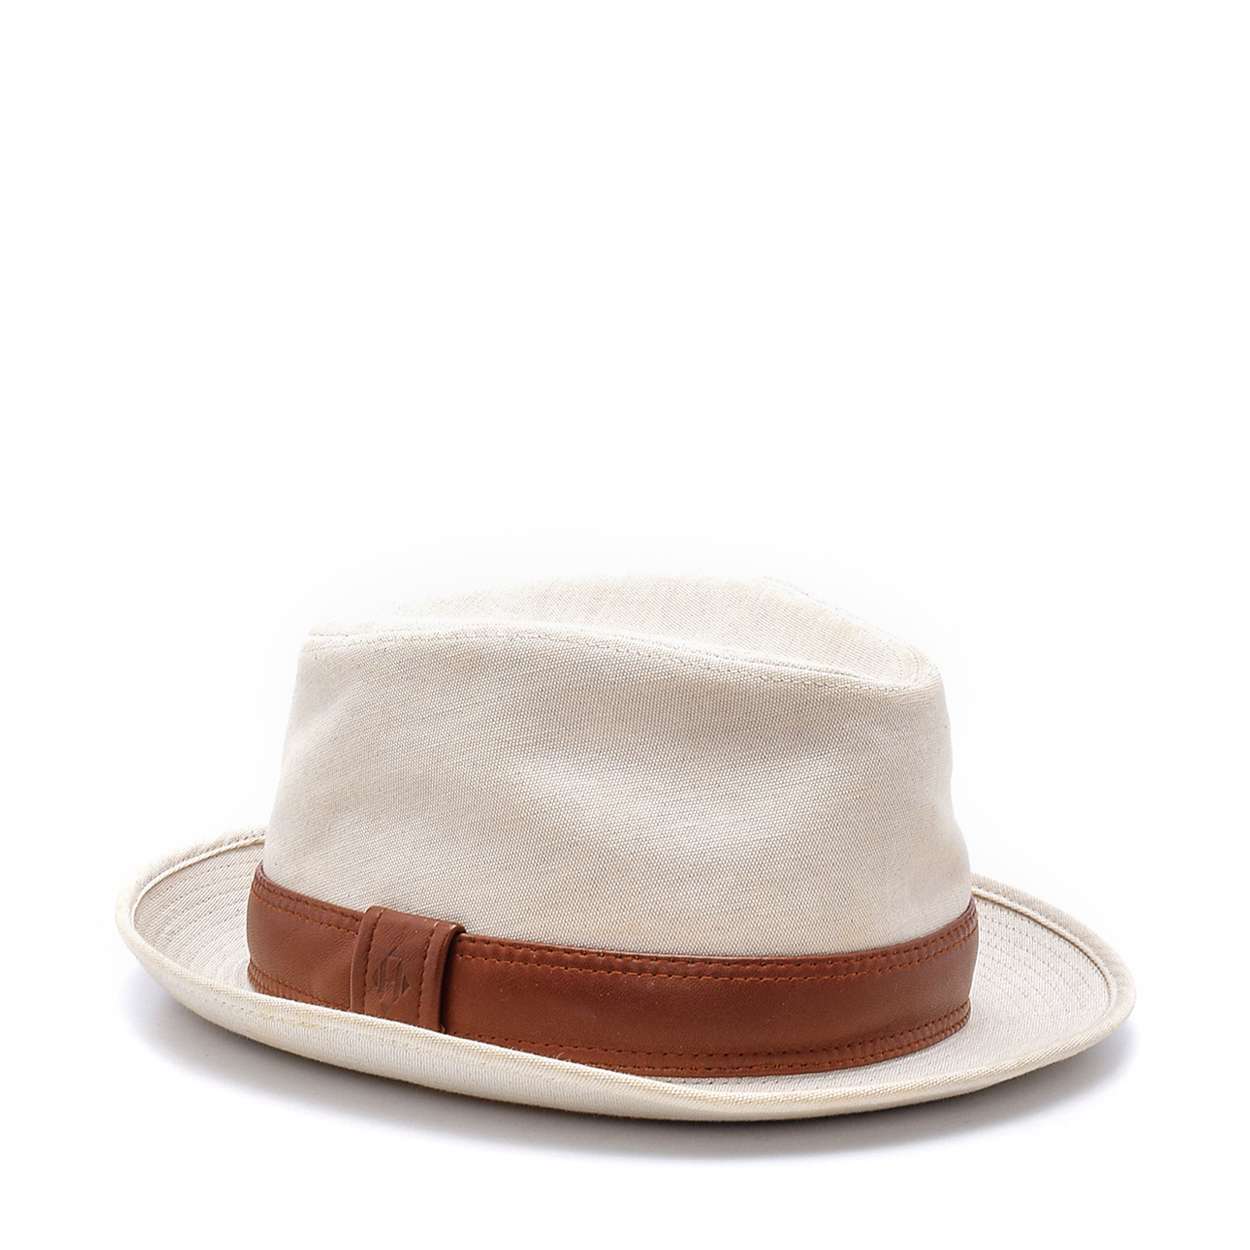 Hermes - Cream Cotton and Brown Leather Hat 